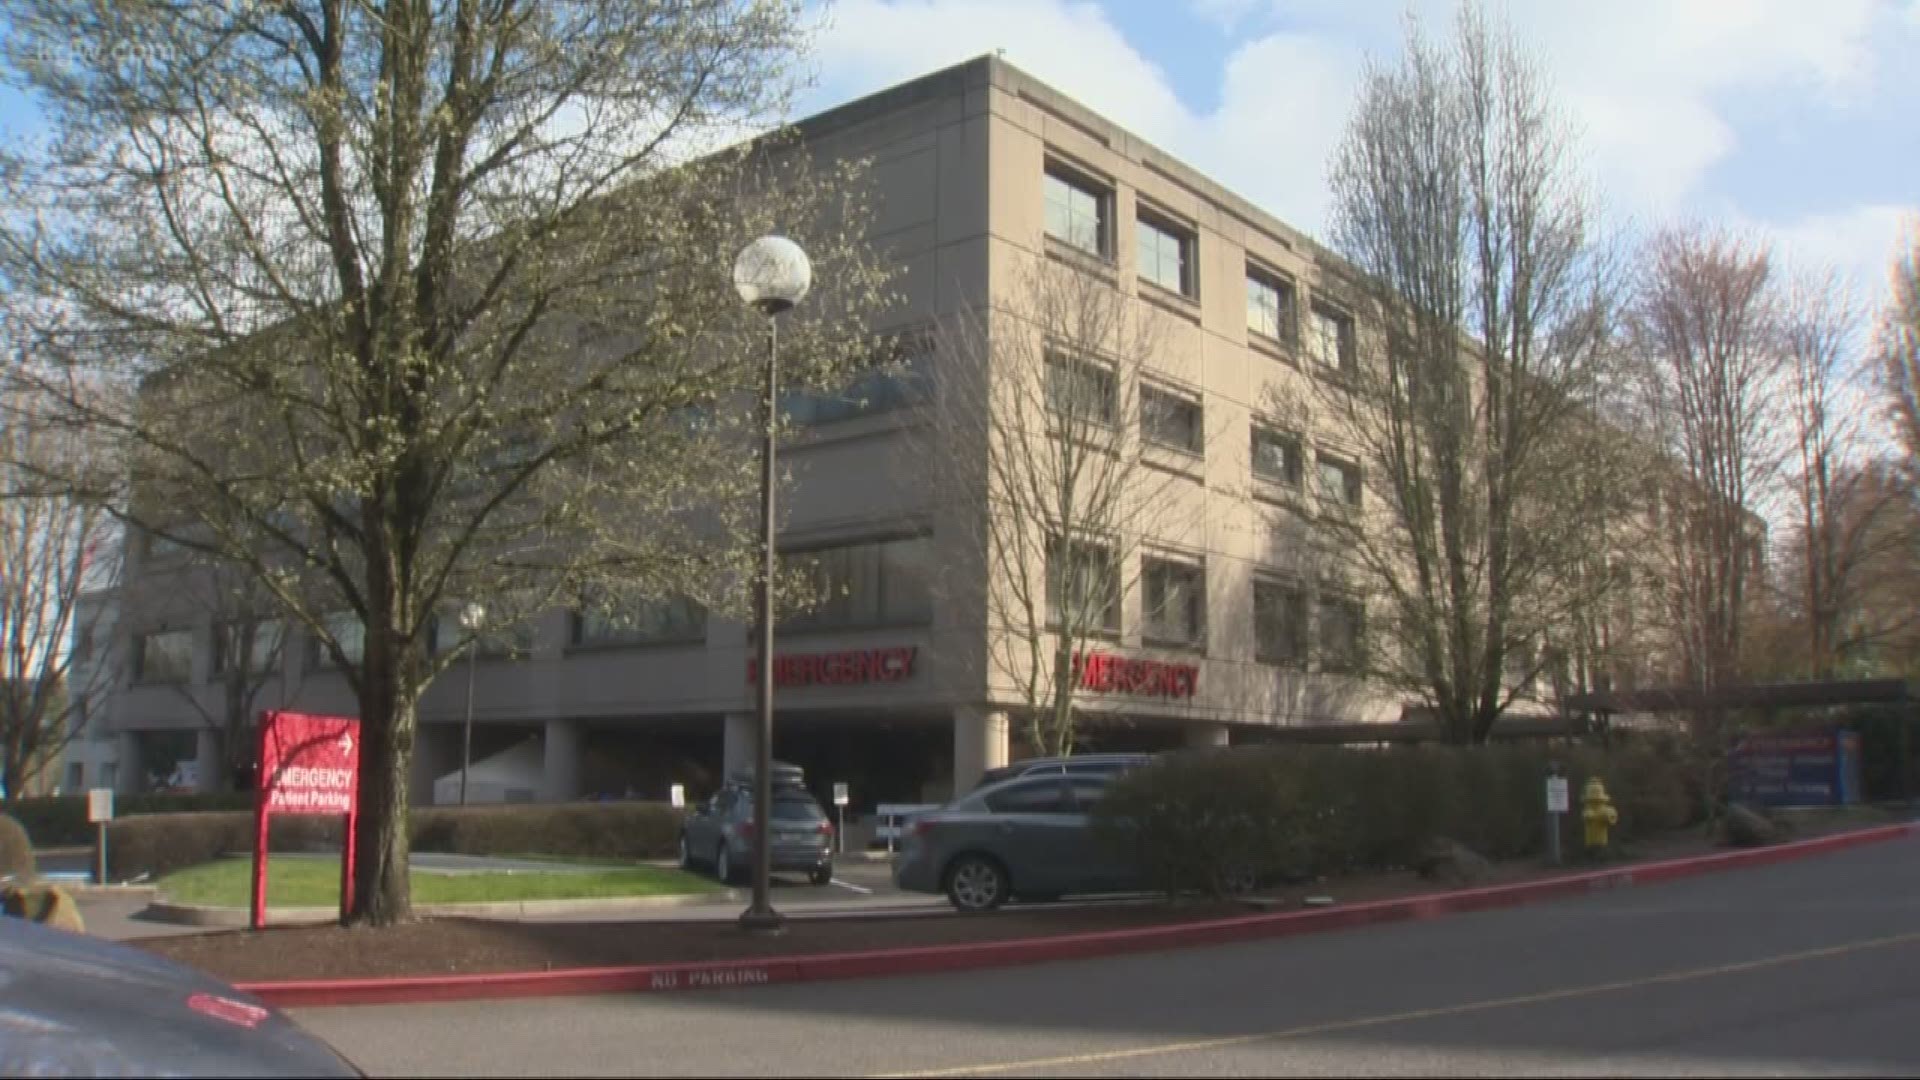 Oregon will open an emergency hospital in Salem. More COVID-19 tests are on the way. Kyle Iboshi has the latest.